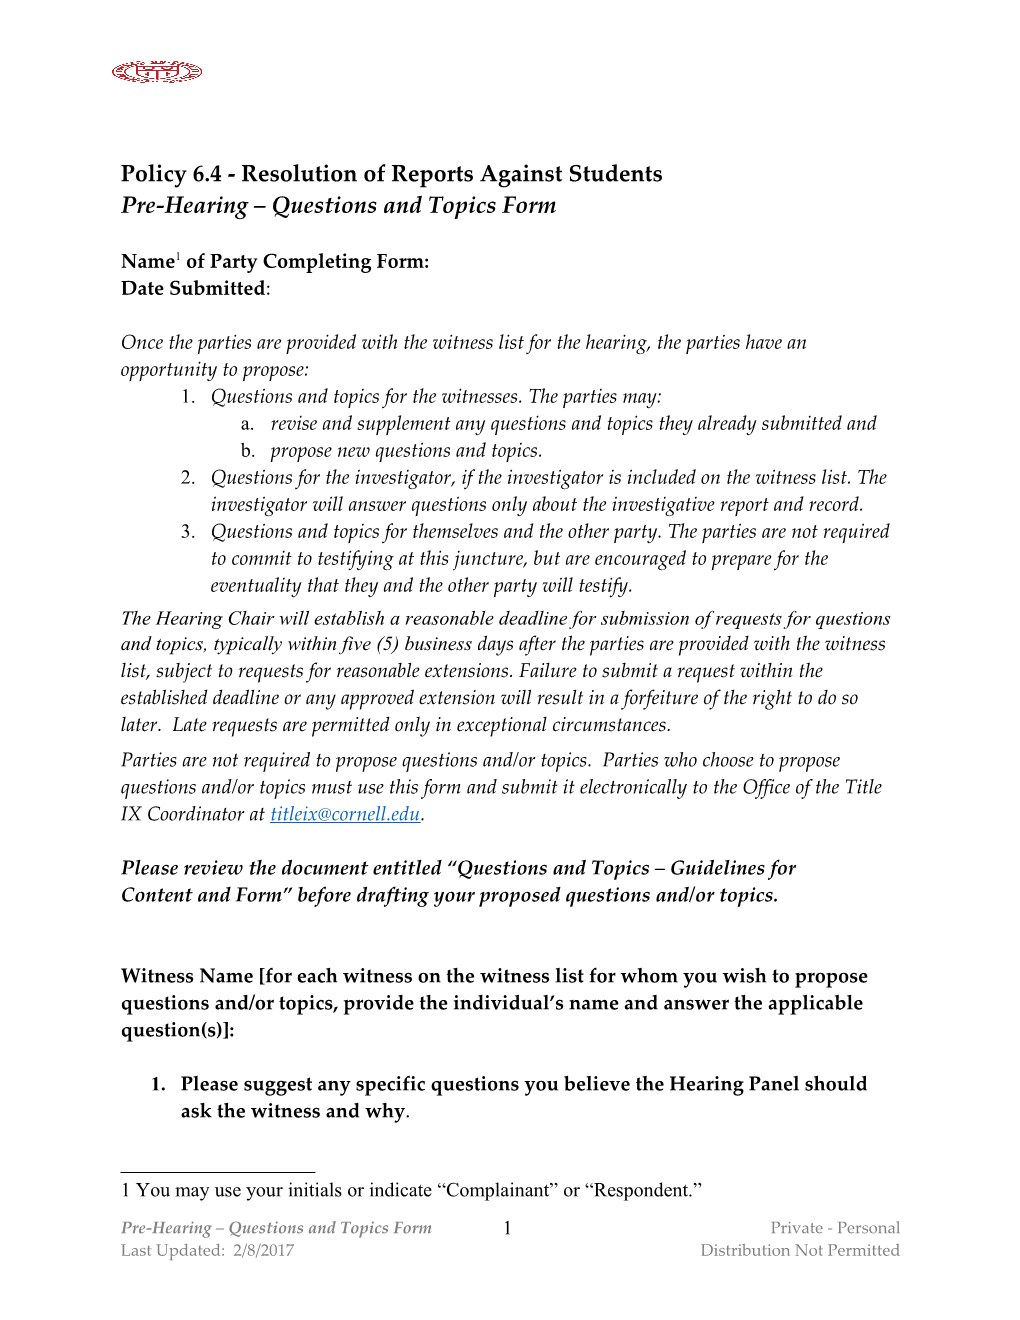 Policy 6.4 - Resolution of Reports Against Students